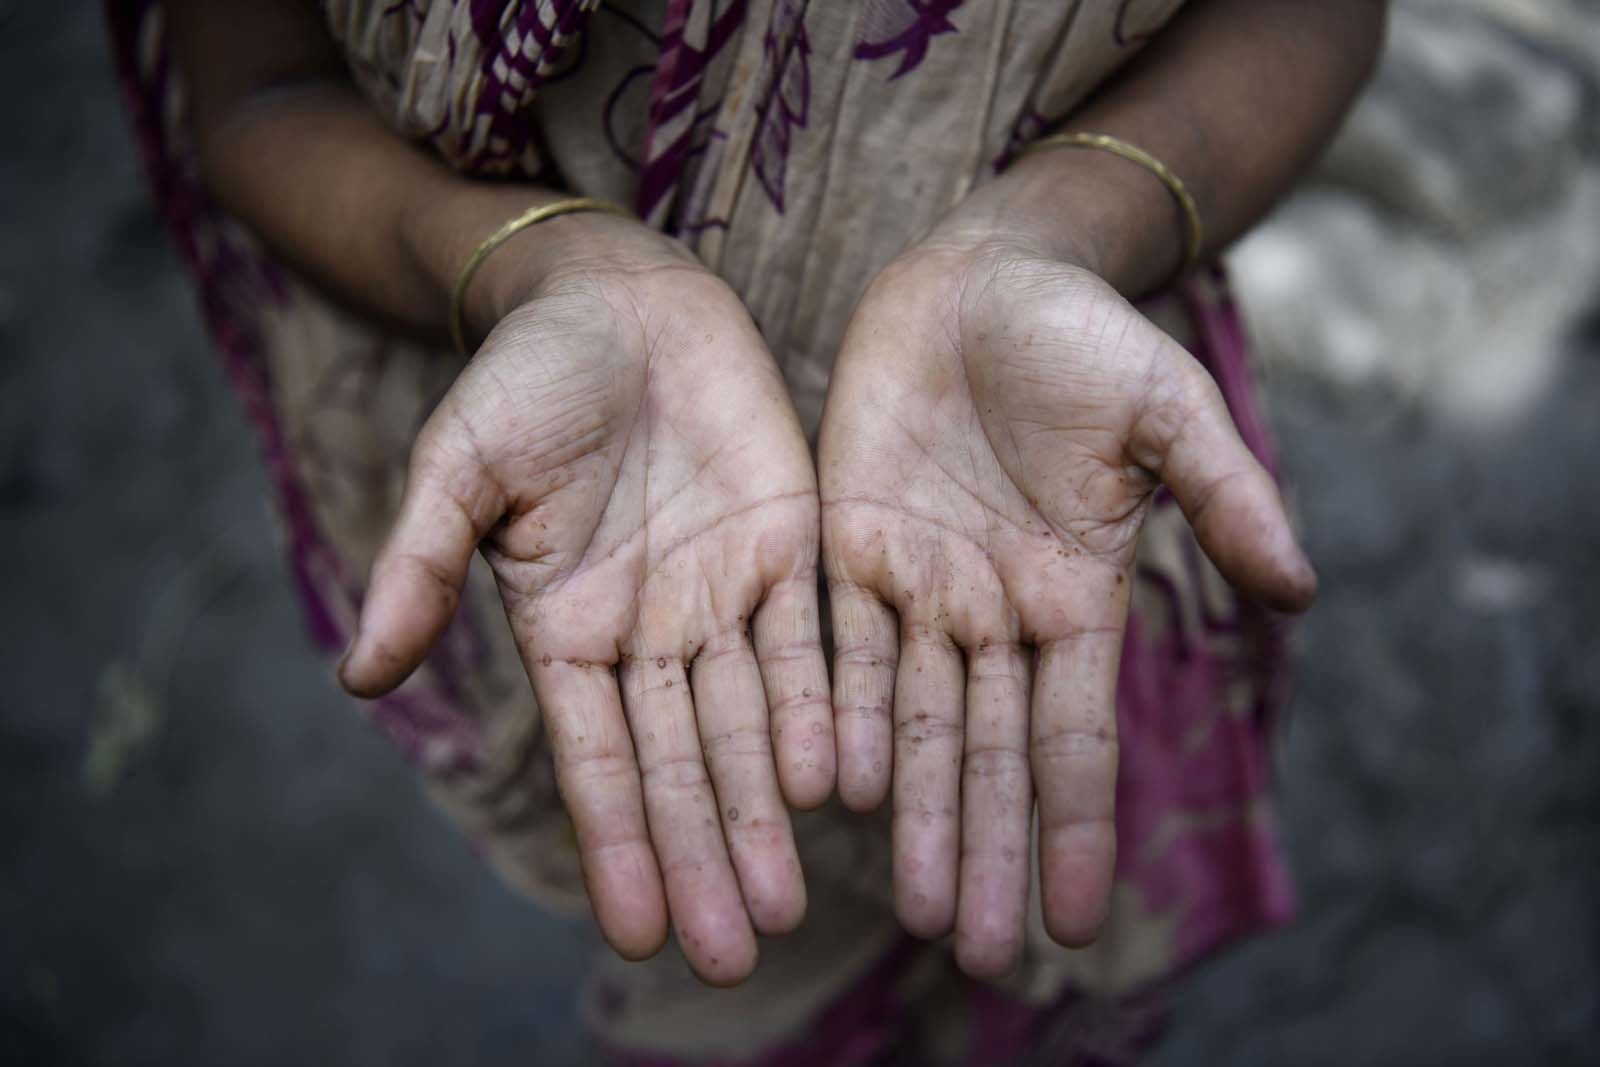 Murshida Begum, 36, has been assisting her husband in making seed balls. Prolonged exposure to water, water hyacinth, and aquatic plants during the process has led to various skin diseases.